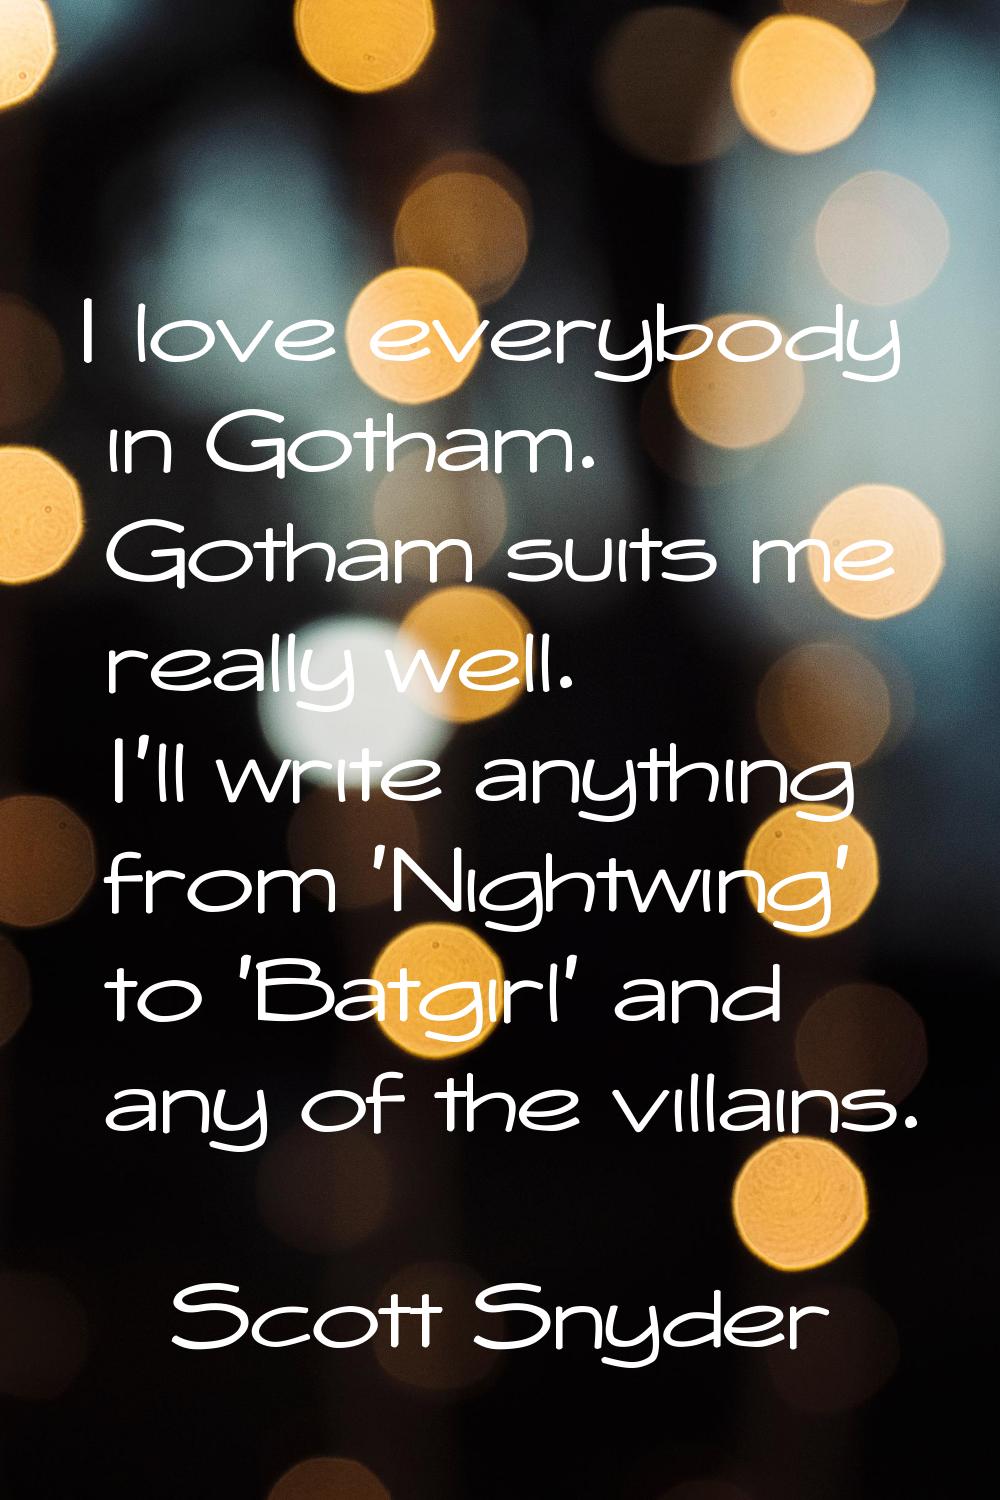 I love everybody in Gotham. Gotham suits me really well. I'll write anything from 'Nightwing' to 'B